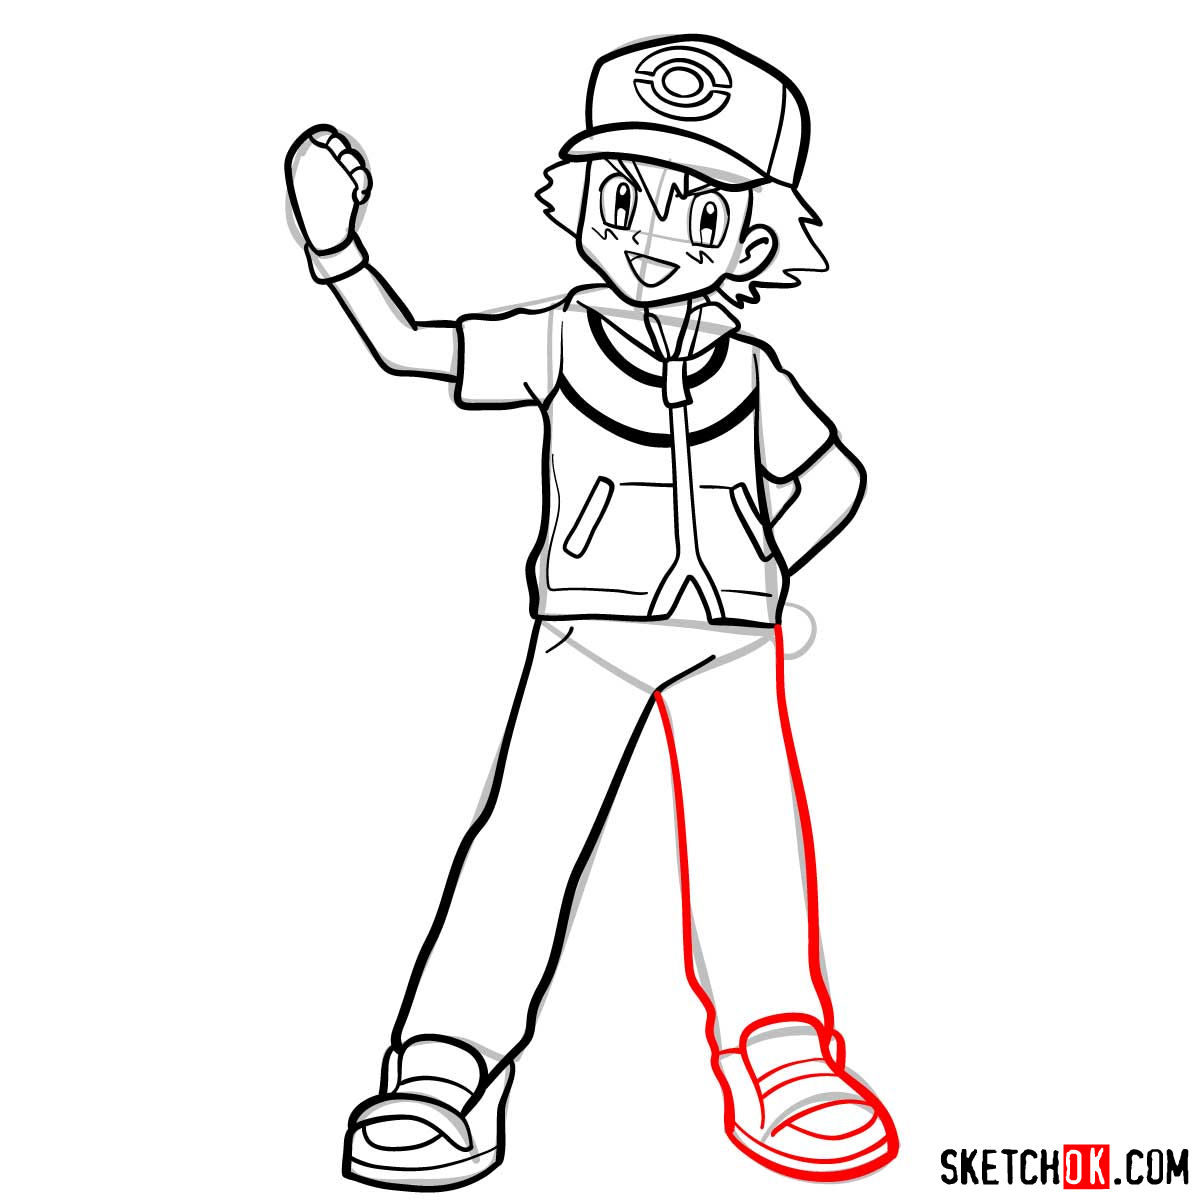 How to draw Ash from Pokemon anime - step 13